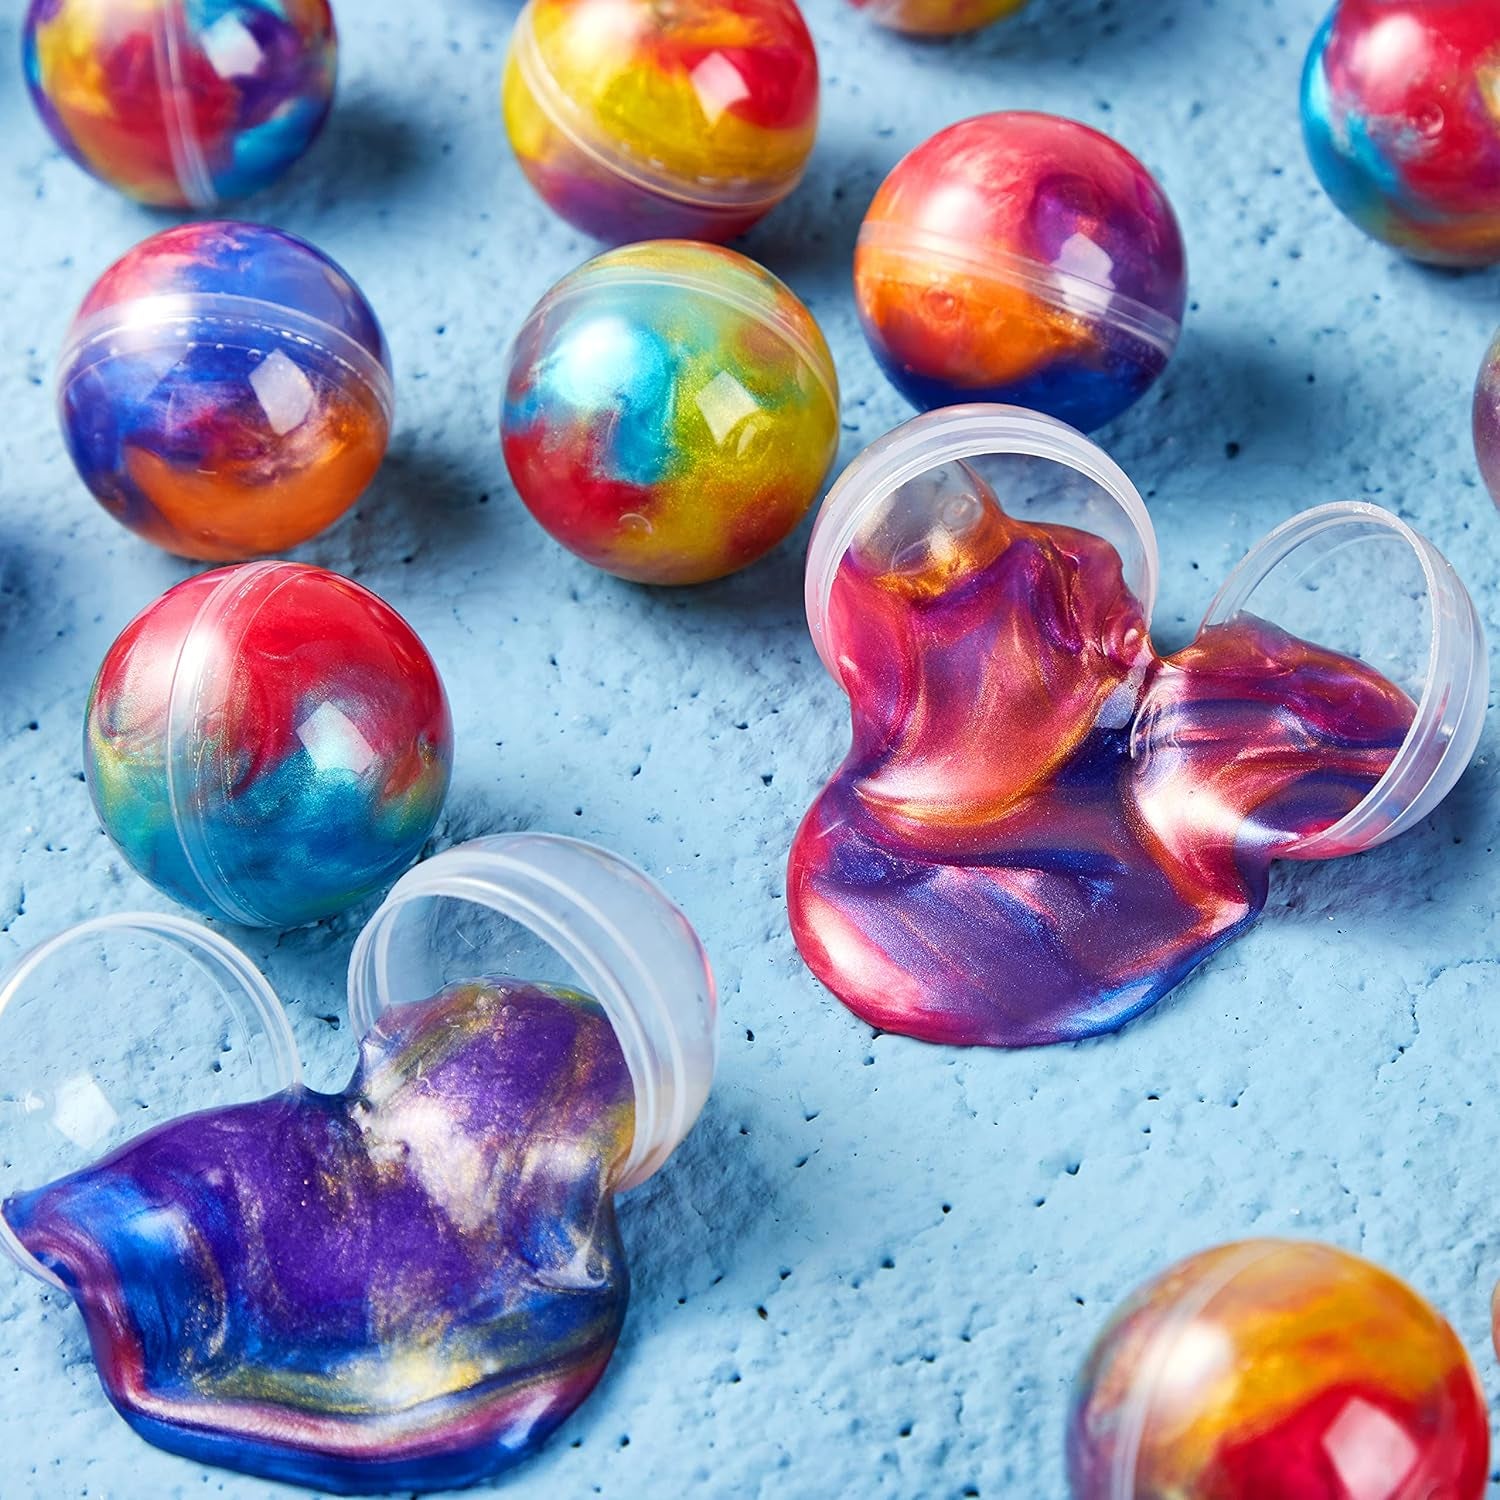 Slime Ball Party Favors - 24 Pack Stretchy, Non-Sticky, Mess-Free Slime for Stress Relief - Safe for Girls and Boys - Classroom Rewards and Christmas Party Supplies